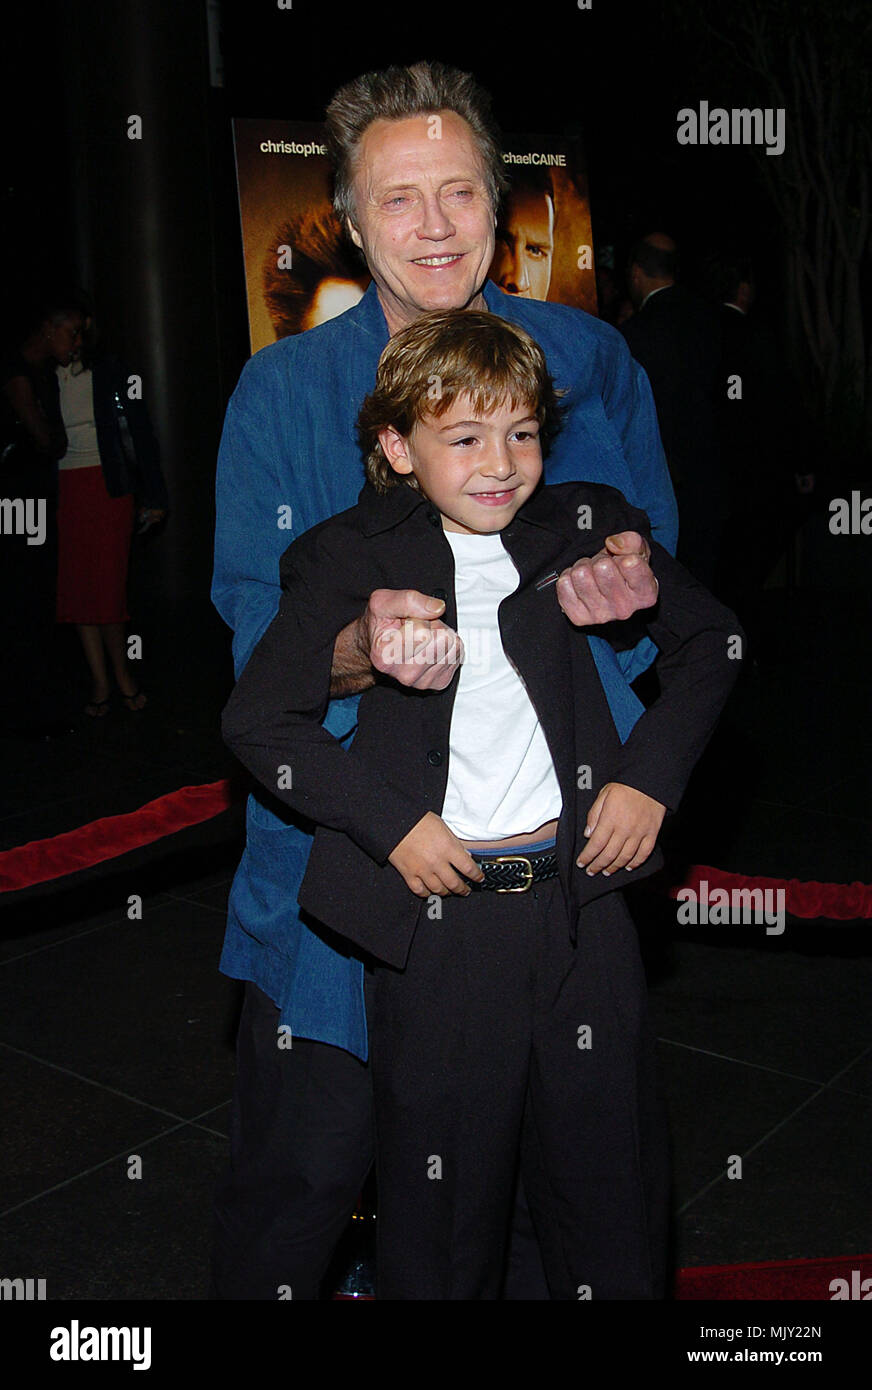 Christopher Walken and Jonah Bobo  arriving at the Around The Bend premiere at the Director Guild Theatre in Los Angeles. September 21, 2004.          -            0WalkenChristopher BoboJ005.JPG           -              0WalkenChristopher BoboJ005.JPG0WalkenChristopher BoboJ005  Event in Hollywood Life - California,  Red Carpet Event, Vertical, USA, Film Industry, Celebrities,  Photography, Bestof, Arts Culture and Entertainment, Topix Celebrities fashion /  from the Red Carpet-, Vertical, Best of, Hollywood Life, Event in Hollywood Life - California,  Red Carpet , USA, Film Industry, Celebri Stock Photo